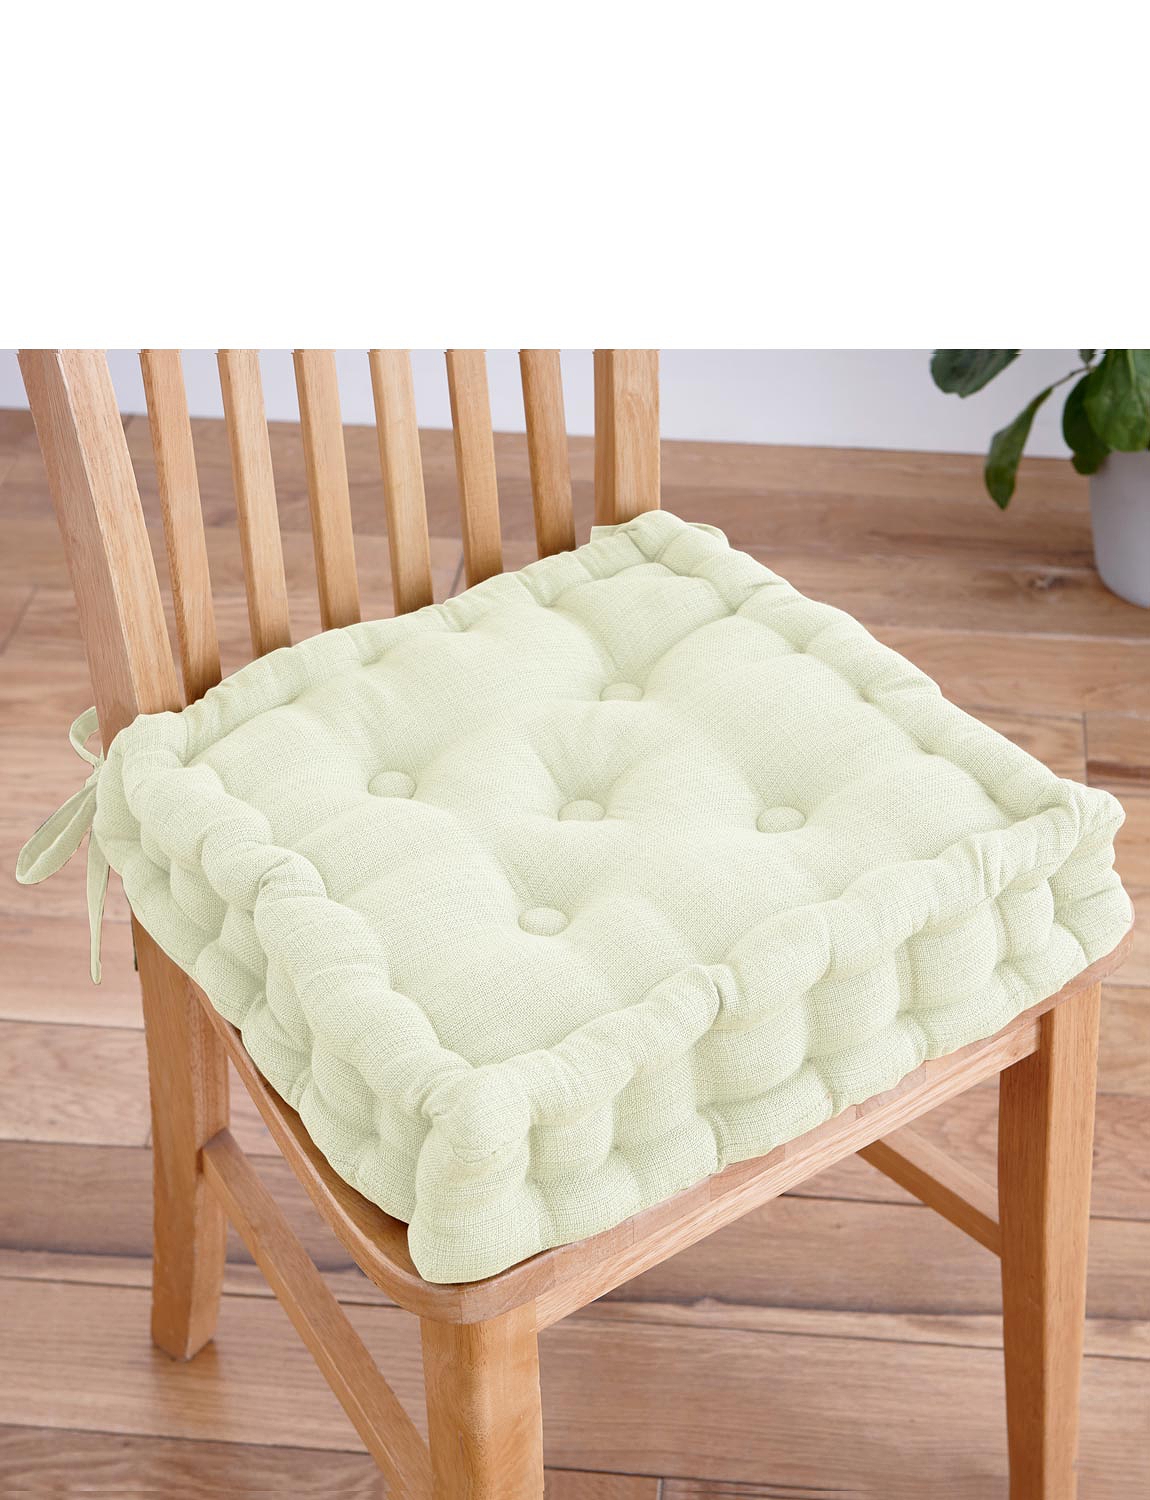 Booster Cushion For Dining Chairs | Chums